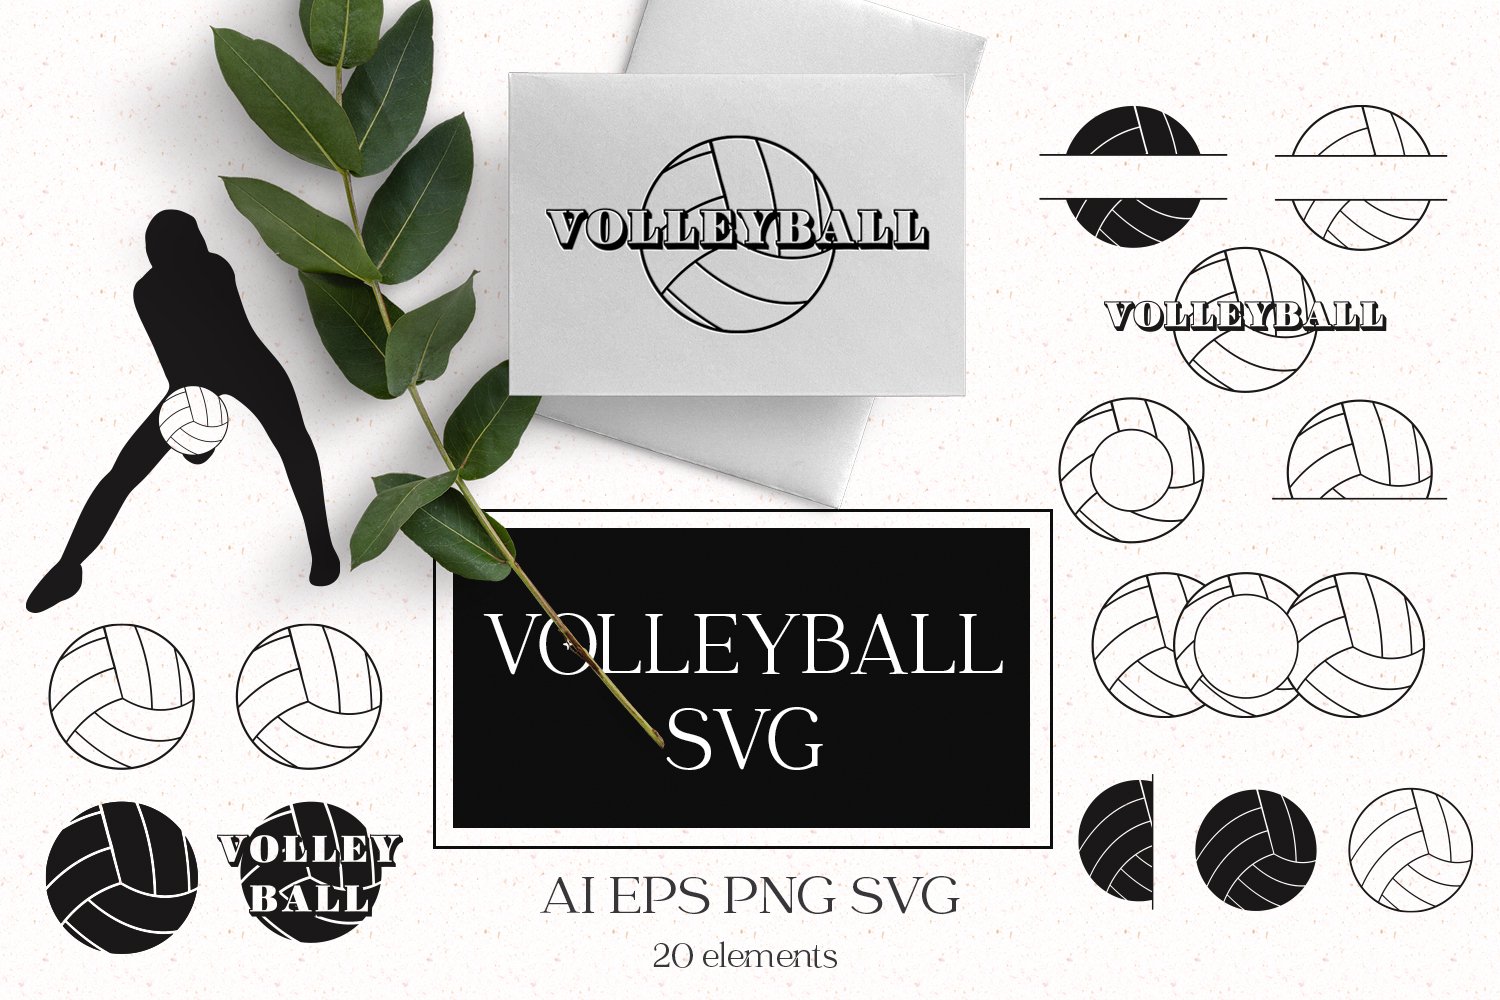 Cover image of Volleyball SVG.